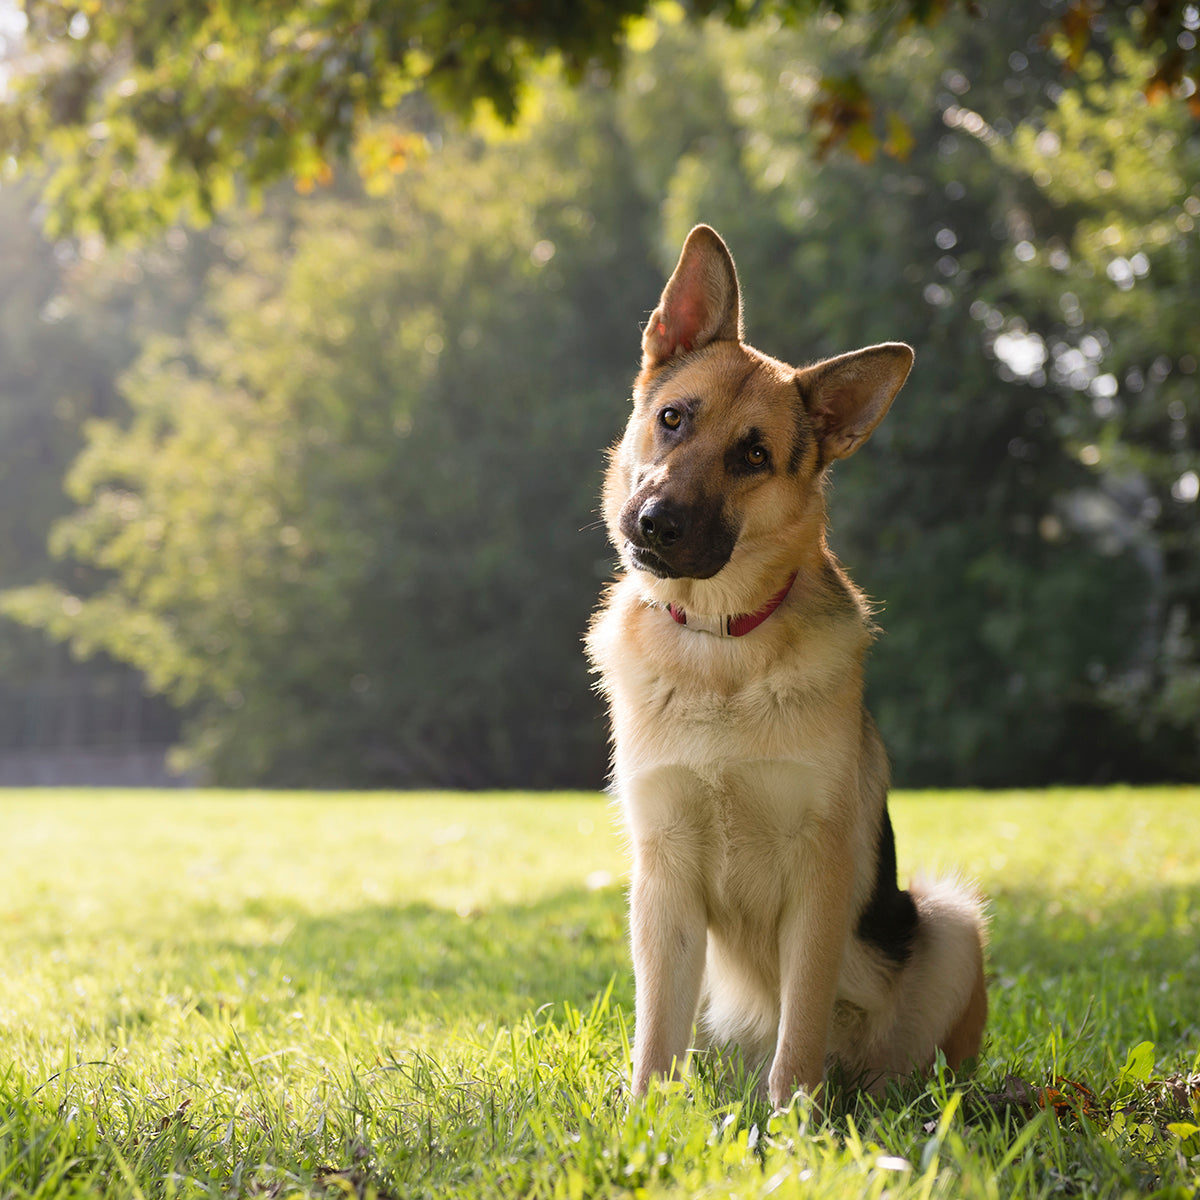 Why Leash Your Dog? 4 Solid Reasons To Keep Your Pet Safe